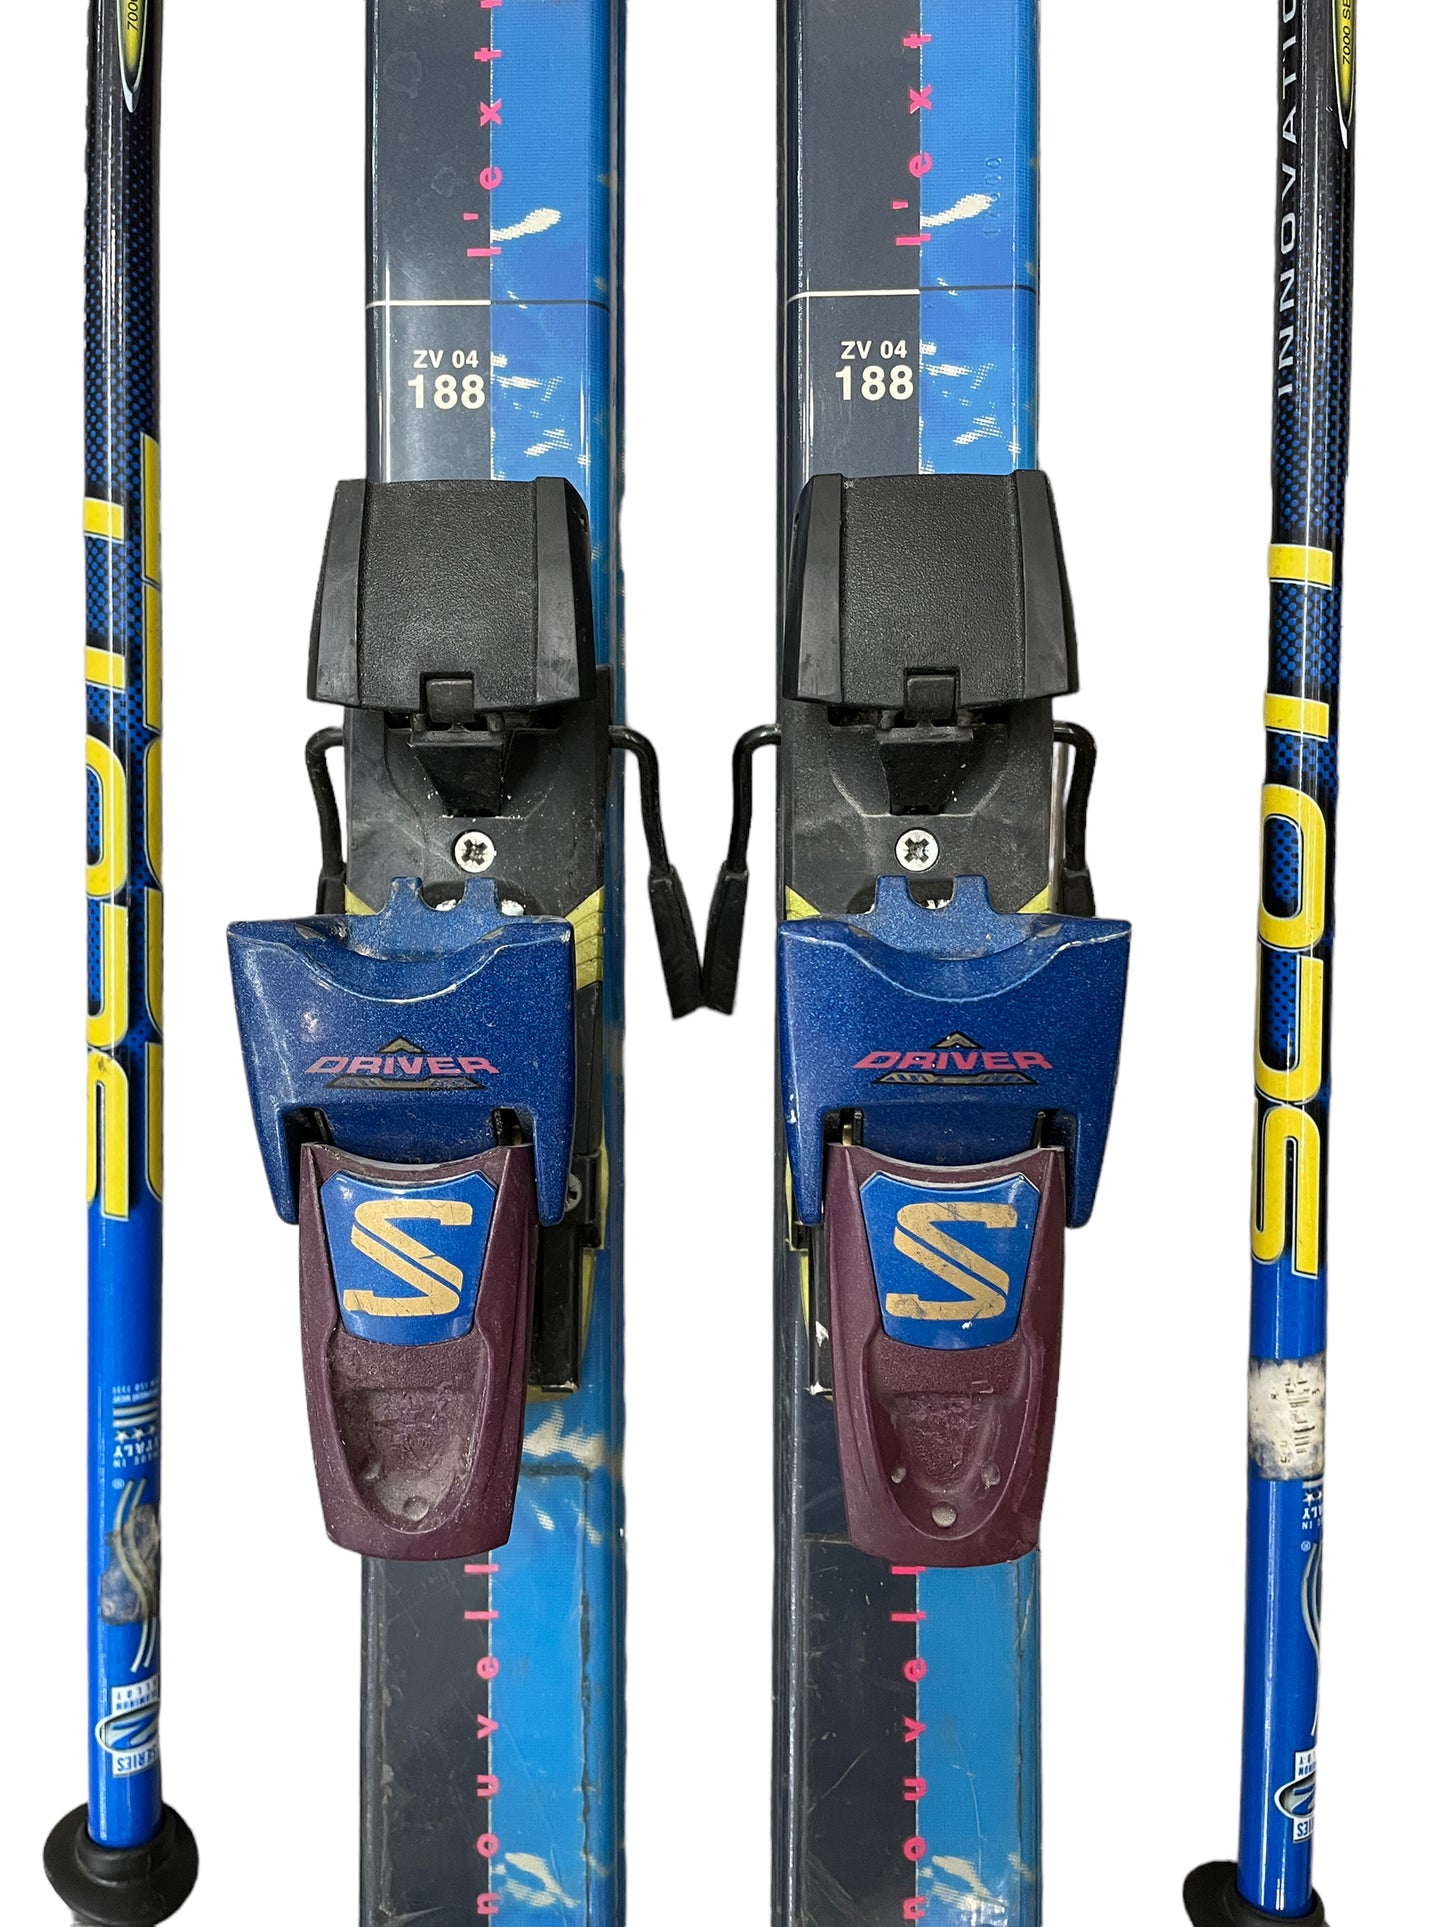 Rossignol Roc Limit Skis with Poles (Local Pick-Up Only)